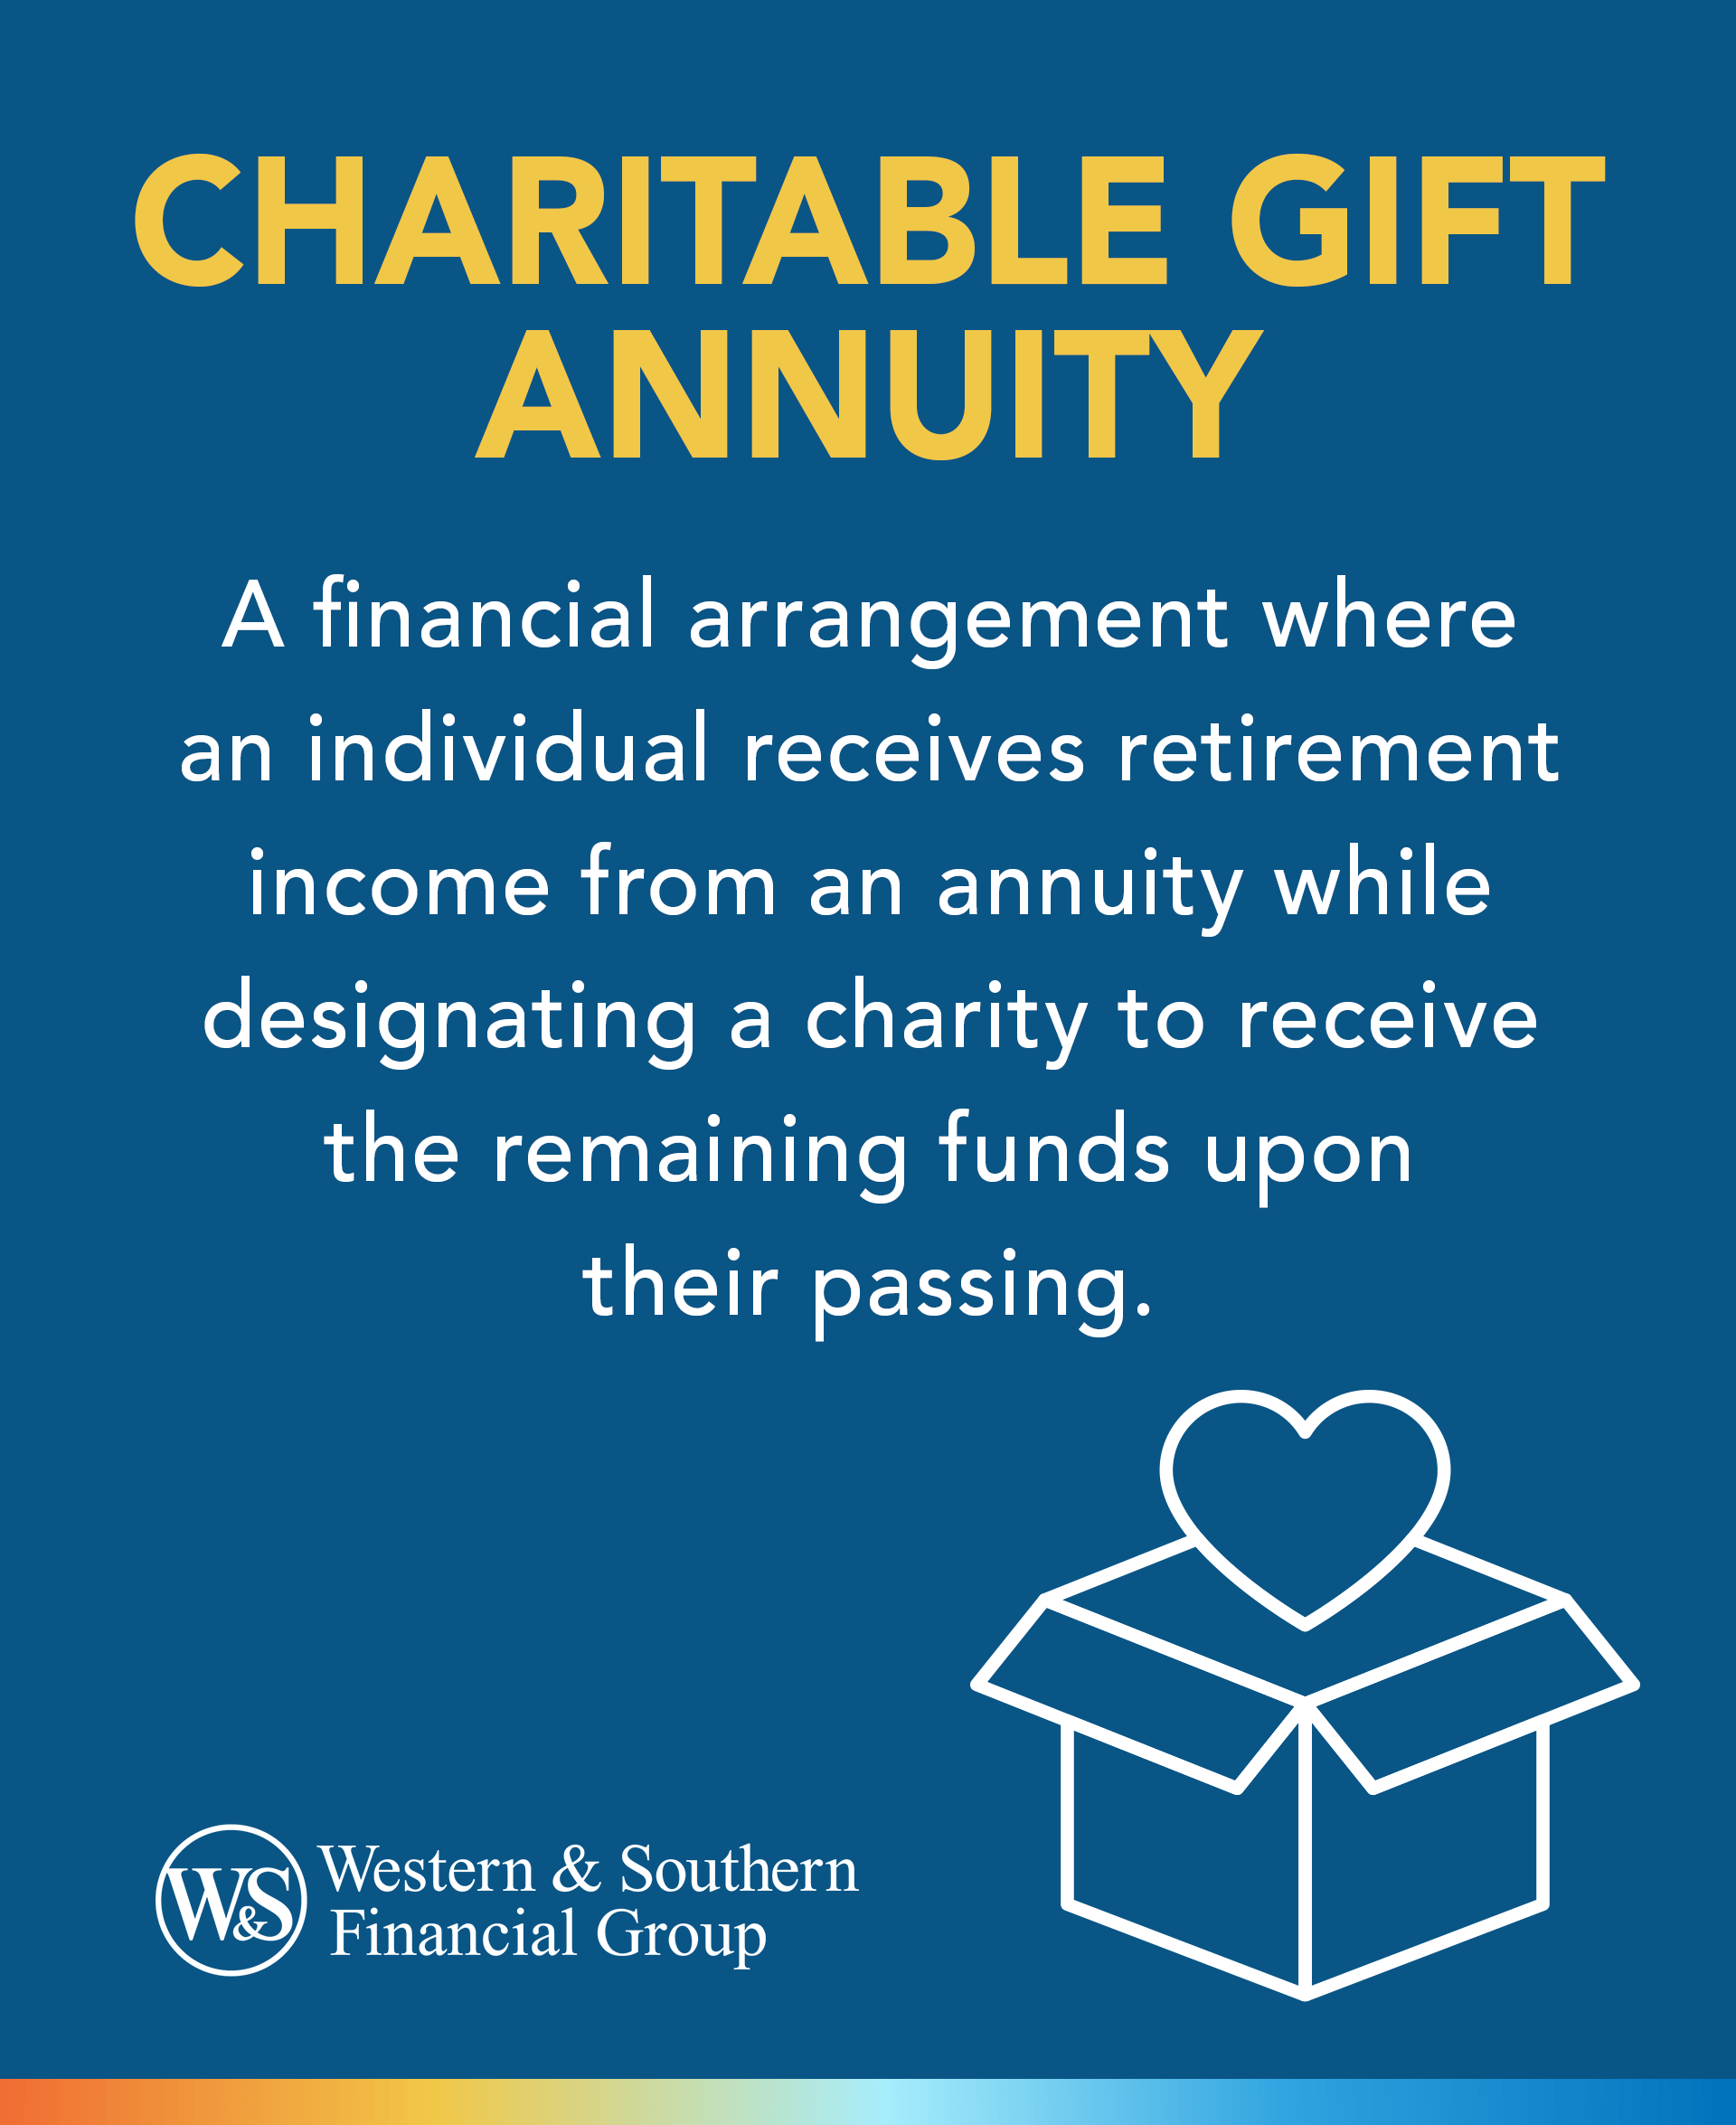 Charitable Gift Annuity definition